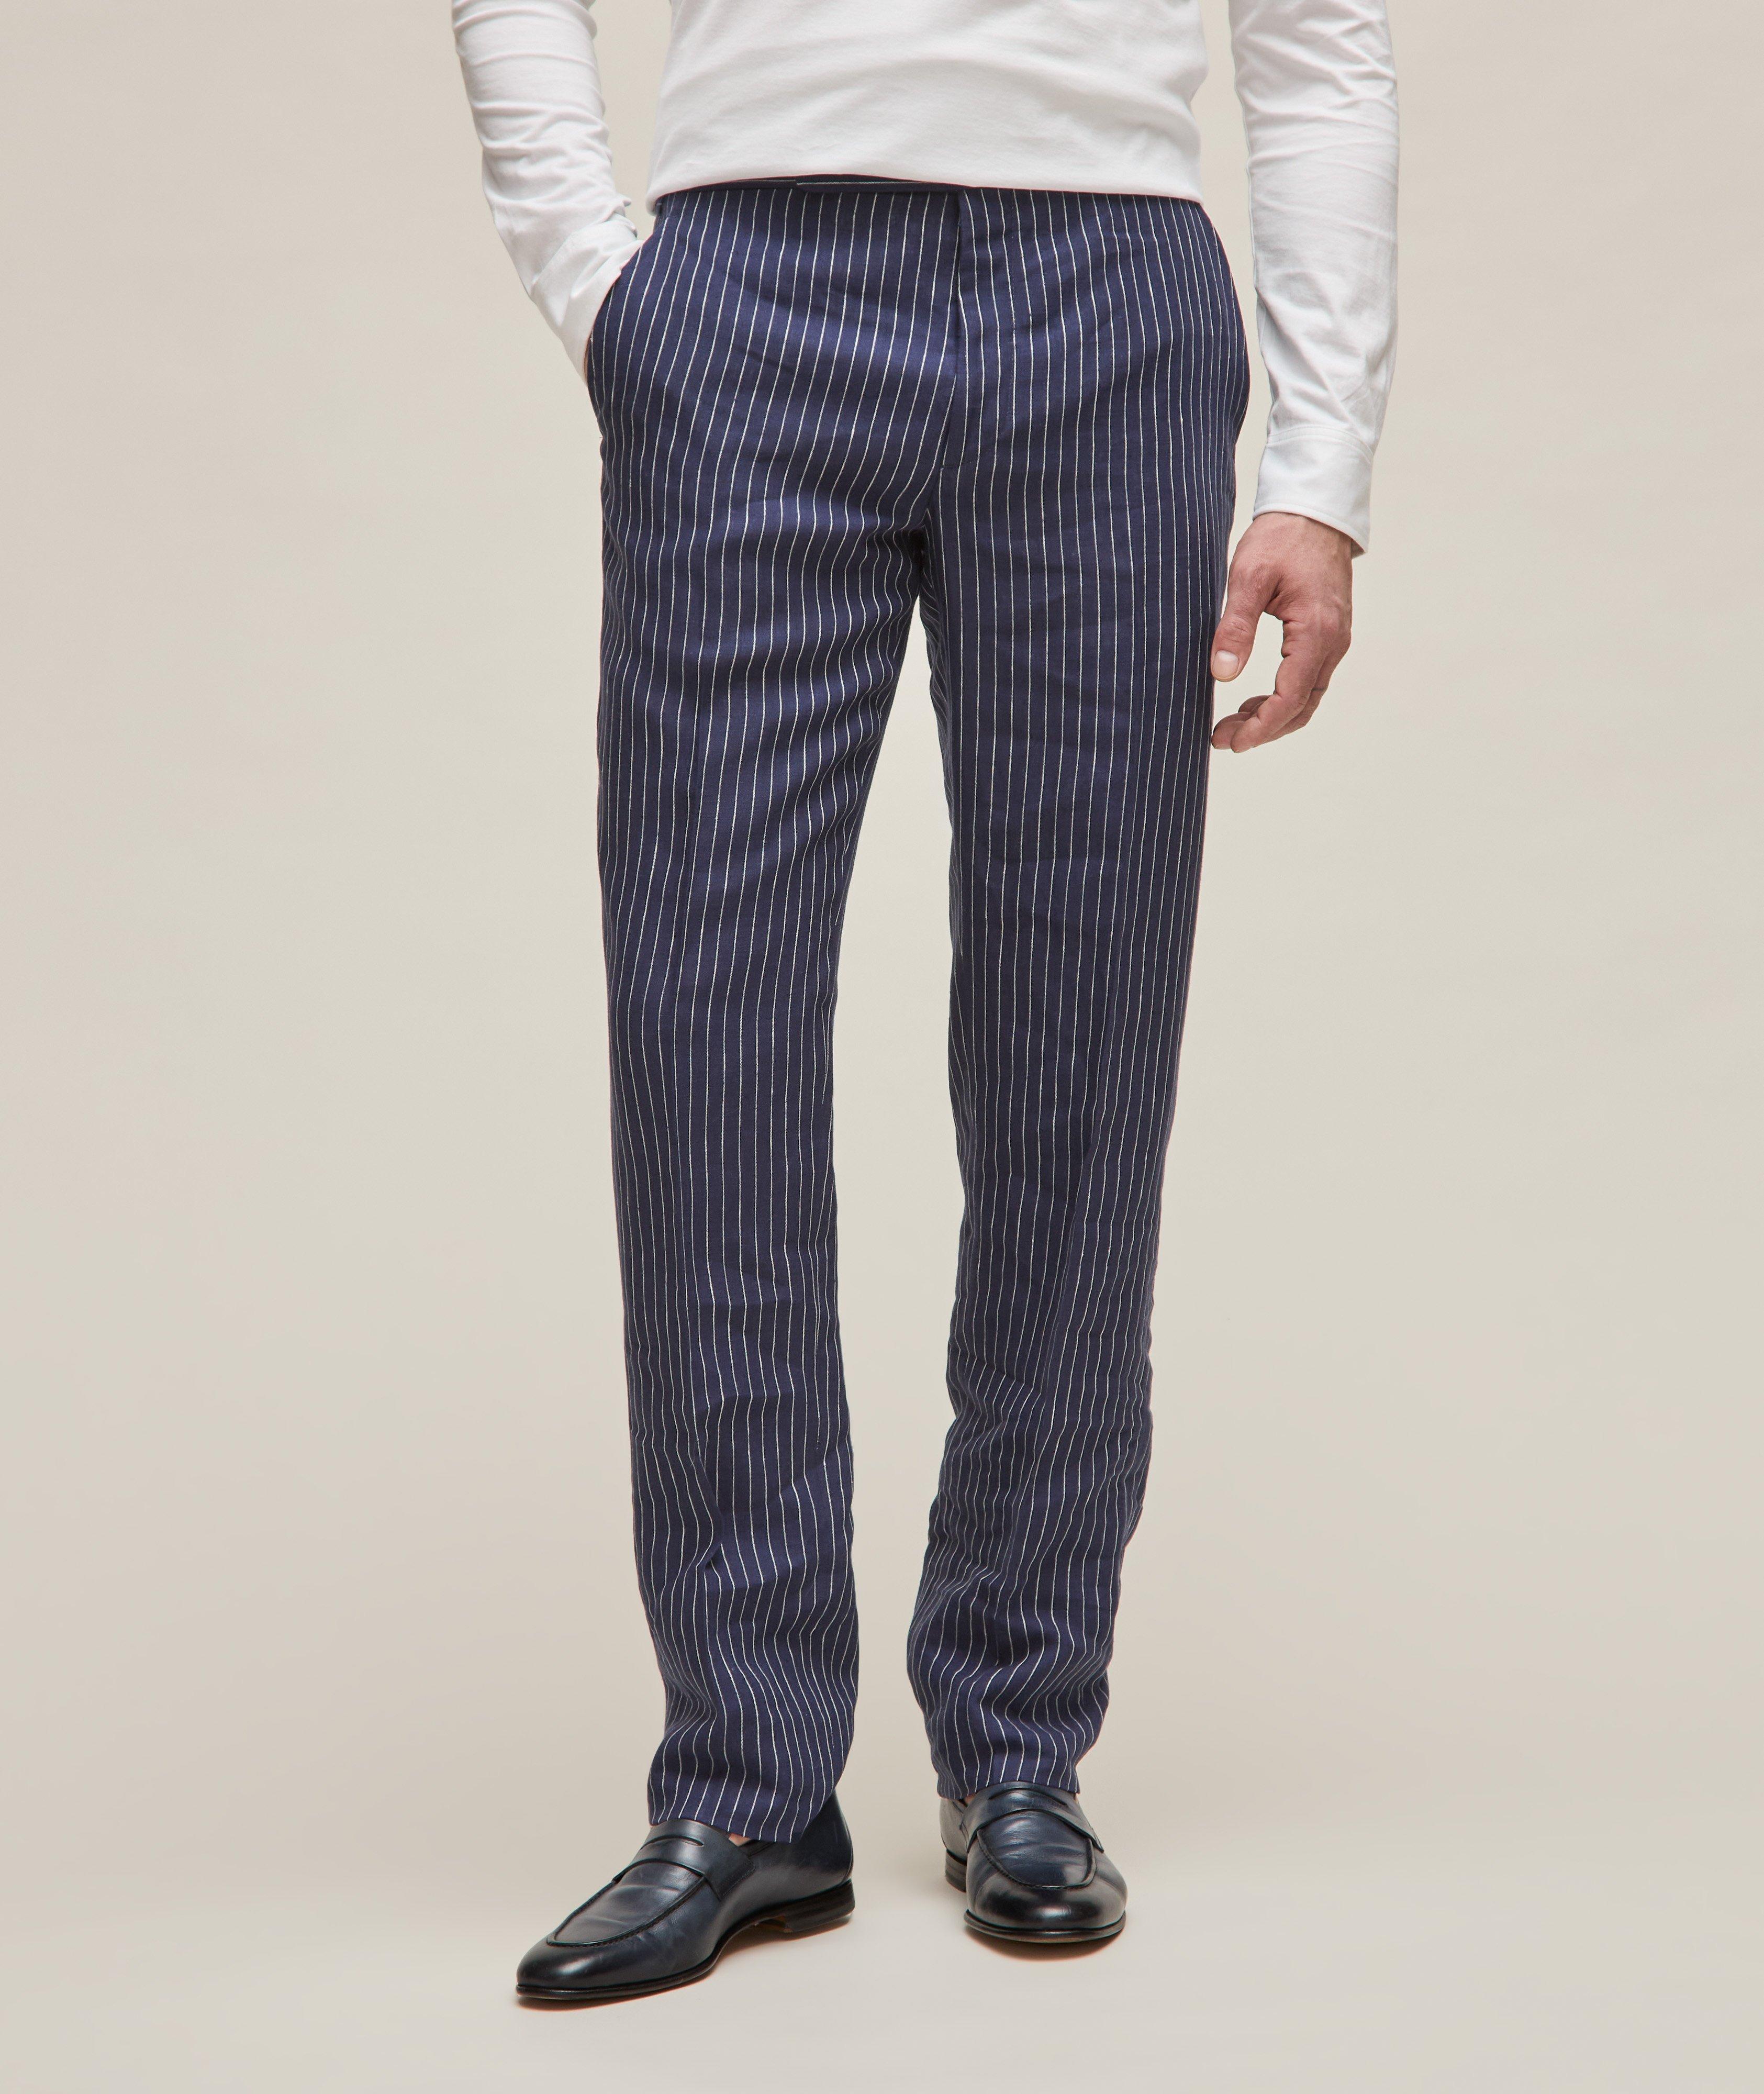 Gregory Narrow Striped Linen Pants  image 2